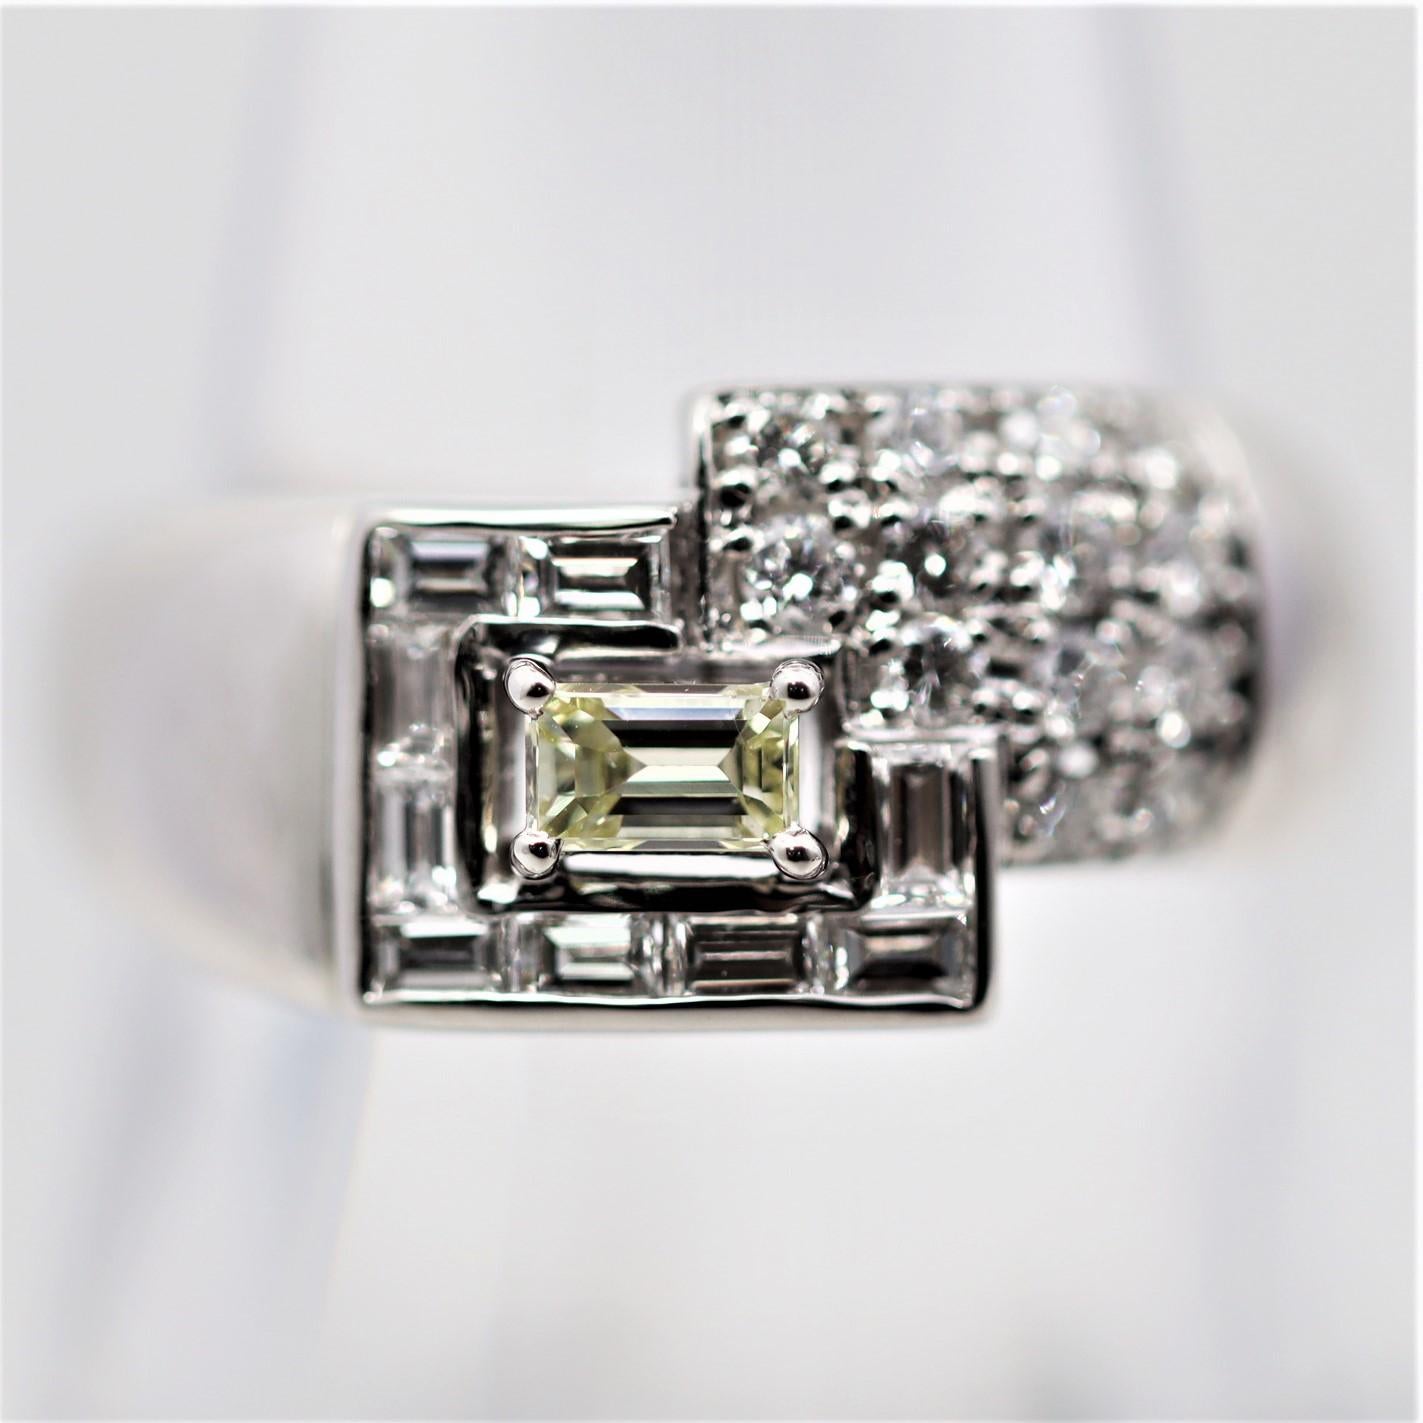 A lovely and stylish ring featuring a 0.21 carat emerald-cut diamond surrounded by additional diamonds set in a geometric pattern. The additional diamonds weigh a total of 0.63 carats. Hand-fabricated in platinum and ready to be worn.

Ring Size 7.50